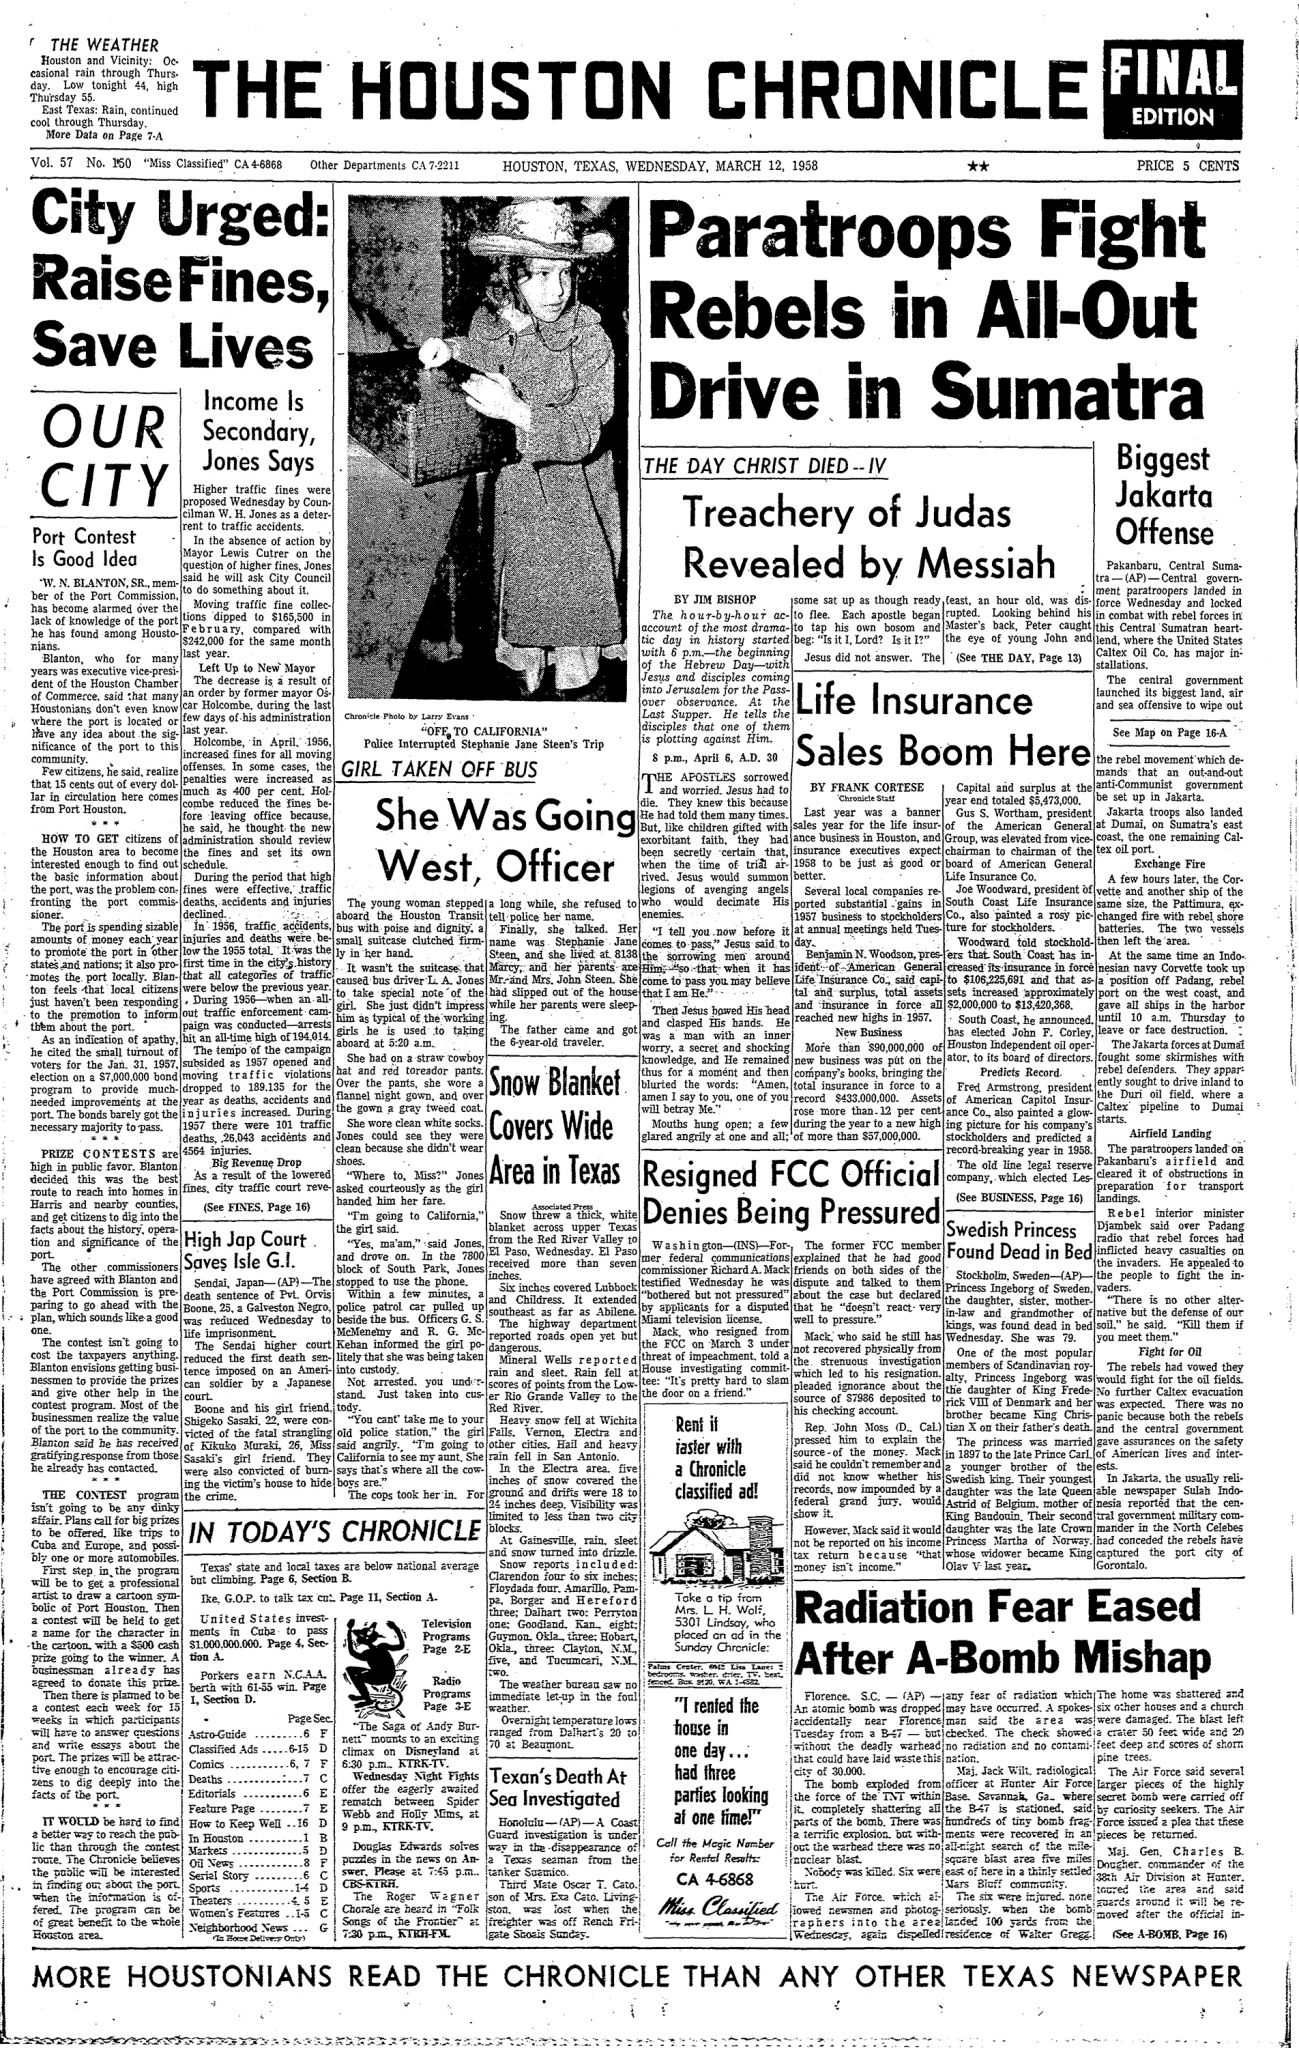 March 12, 1958: A child catches a bus ride and ends up on the front page